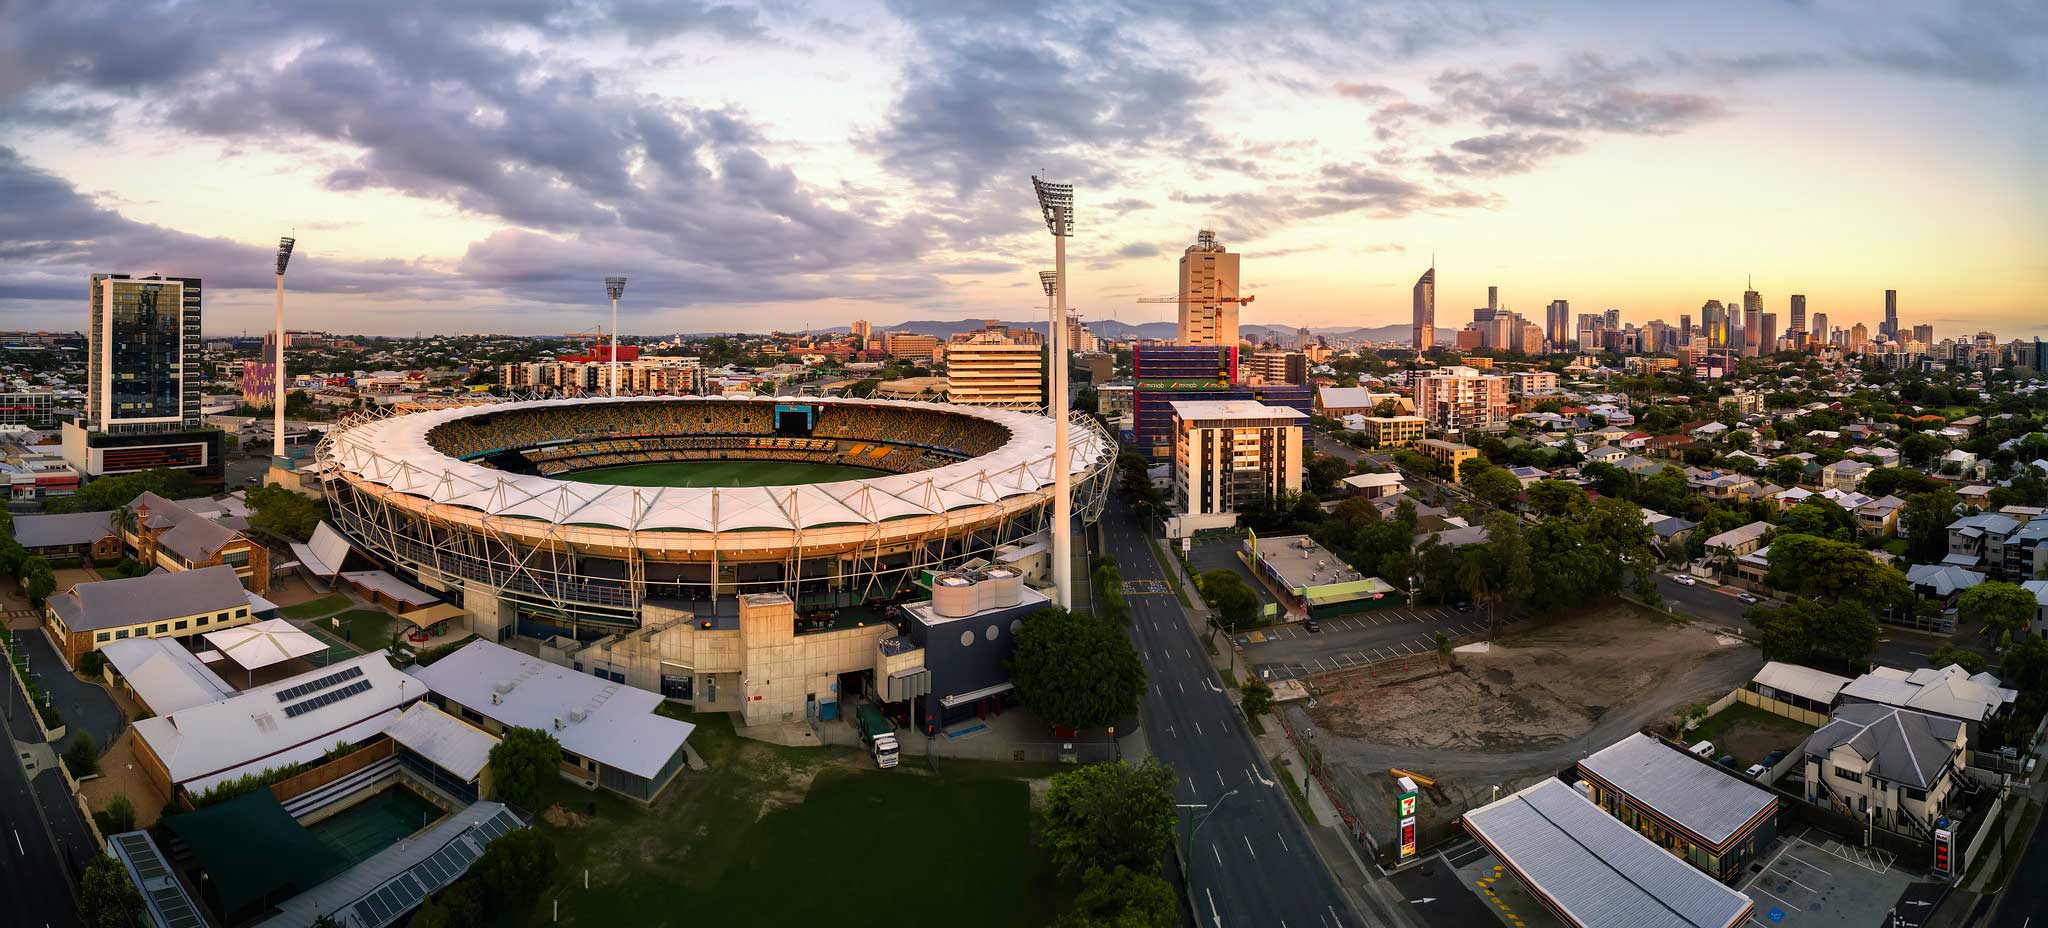 Aerial Drone Photographs Wooloongabba Sports Stadium. DroneAce takes multiple images to create impressive wide angle panorama of iconic Brisbane stadium